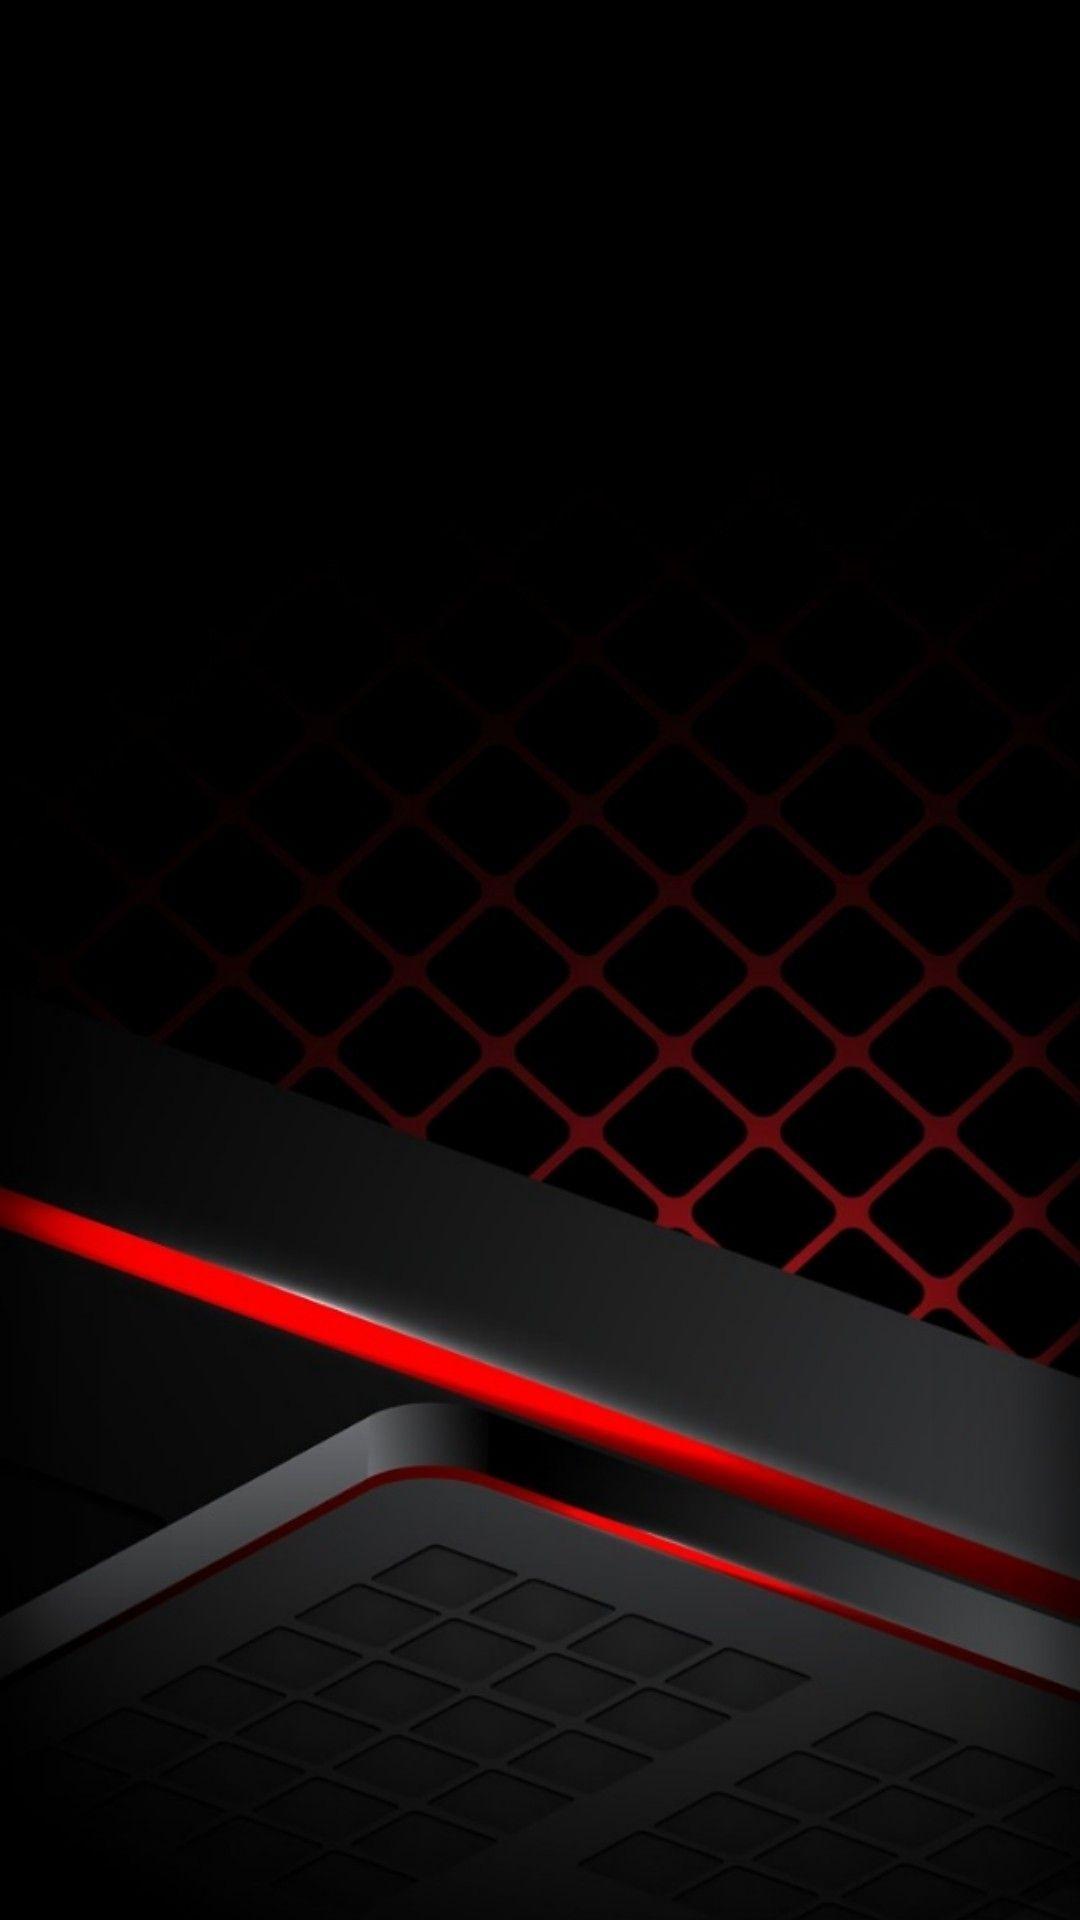 Cool Black and Red Gaming Wallpapers - Top Free Cool Black and Red